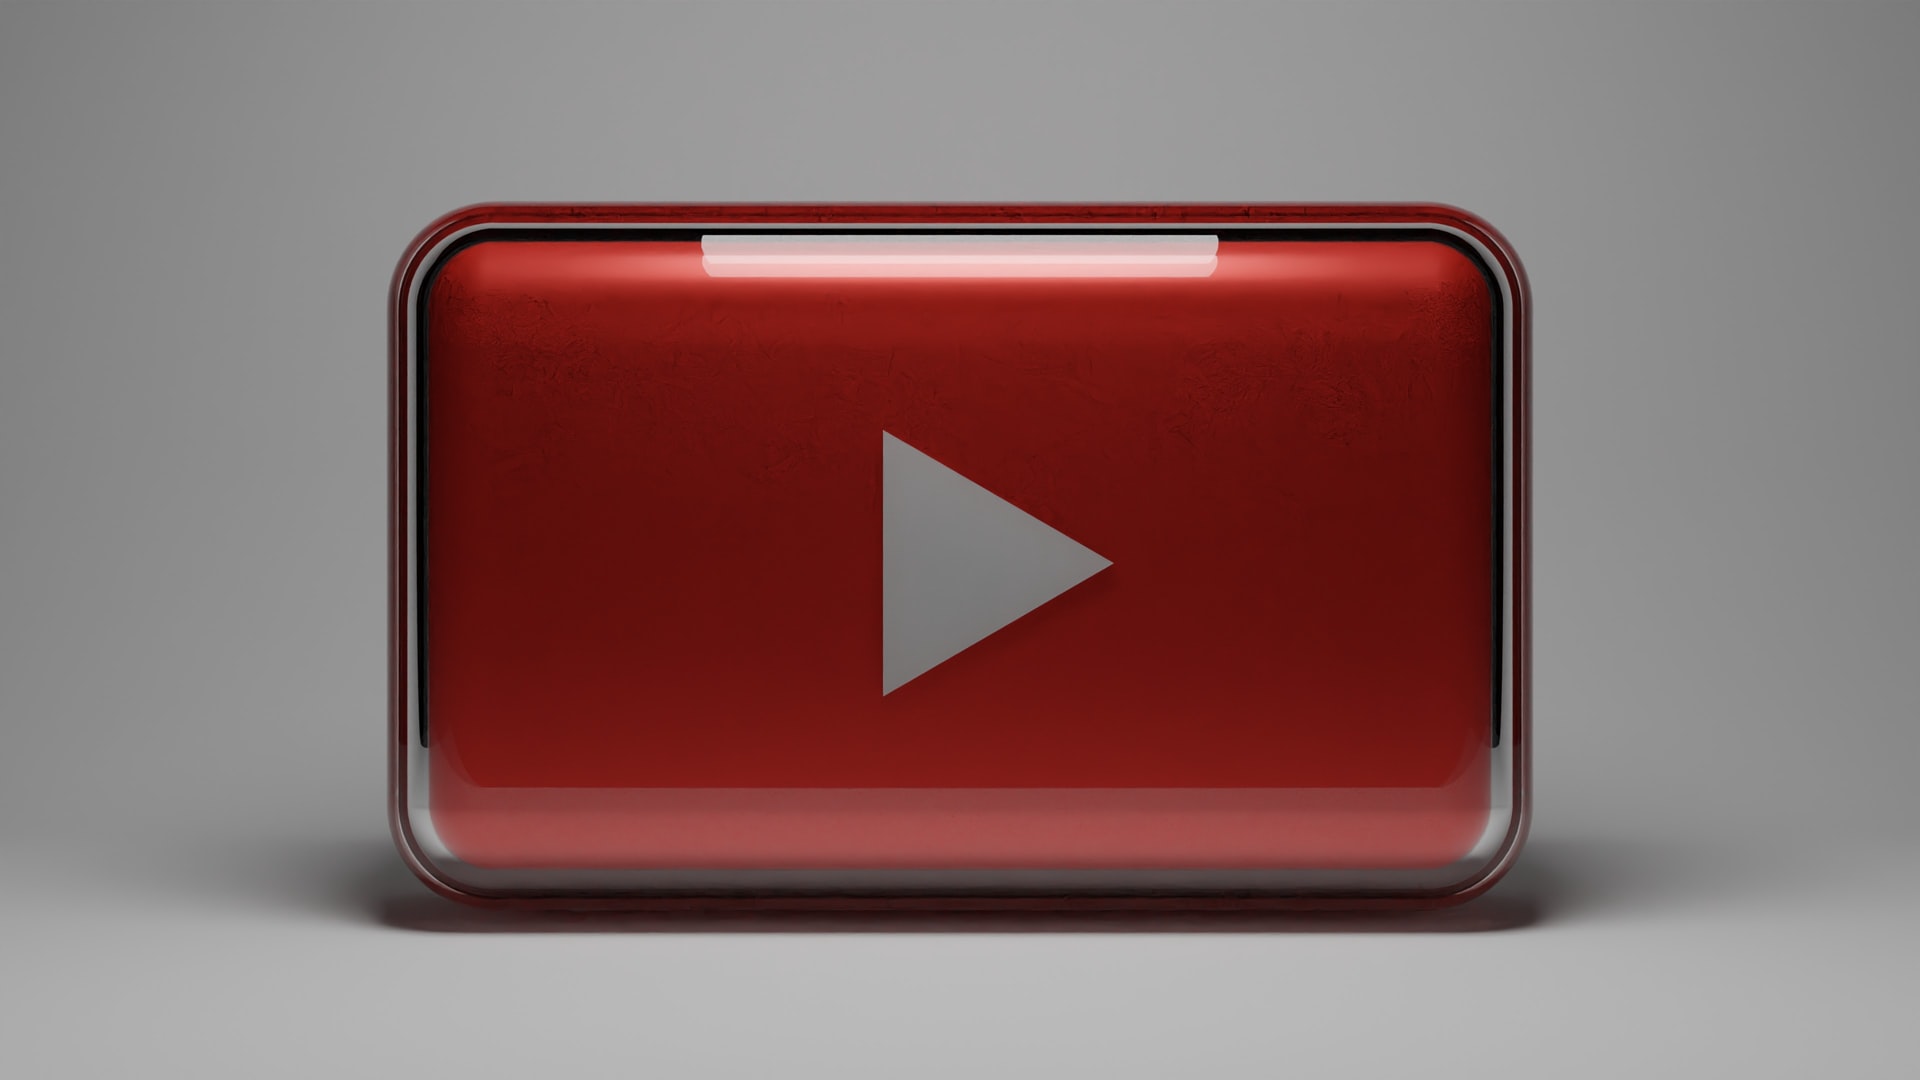 YouTube on Android TV is testing functionality that promises to be unpleasant